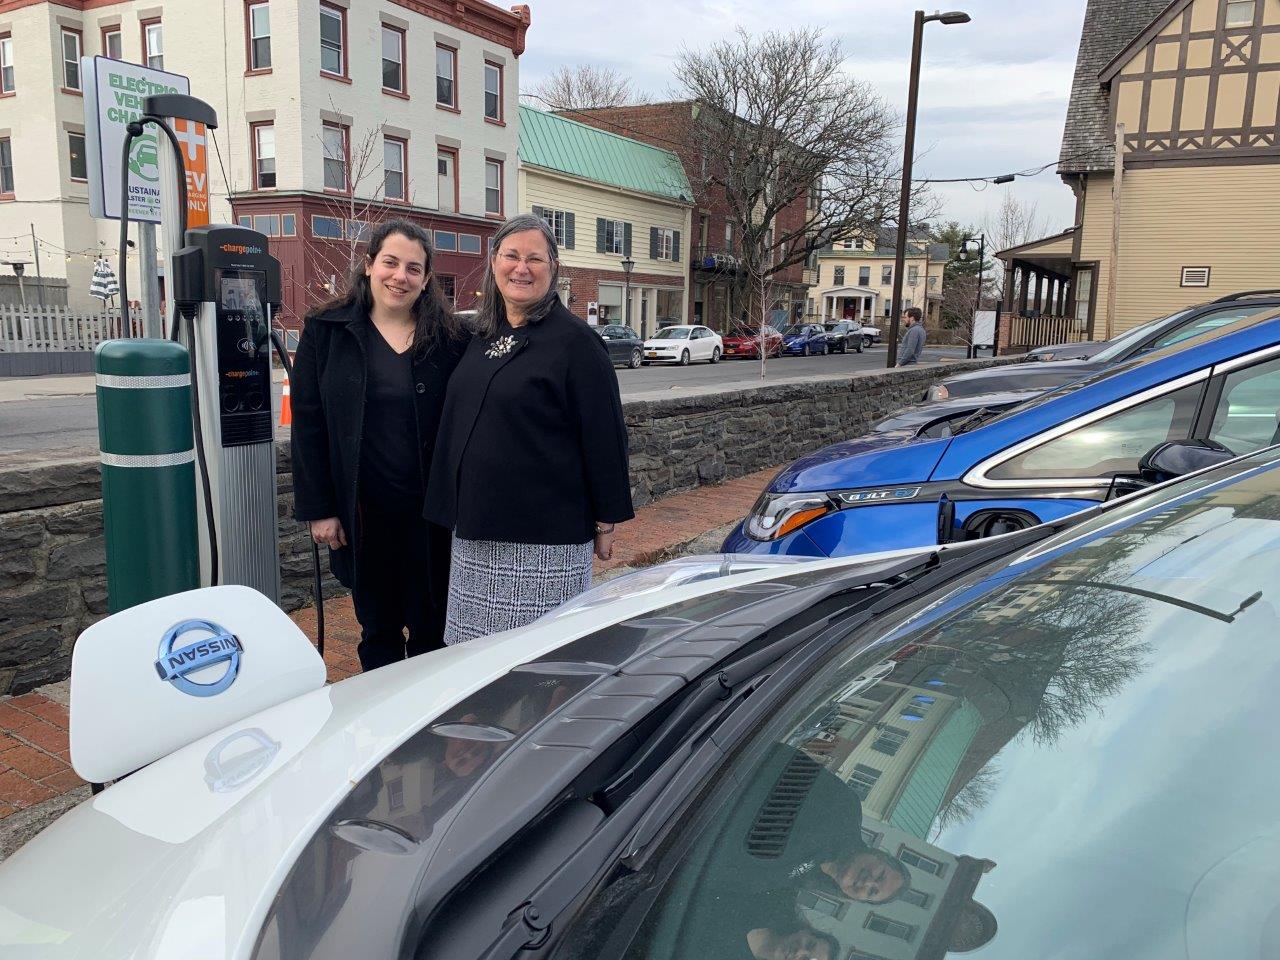 Photo: Acting Ulster County Executive Adele B. Reiter and Amanda LaValle, Director of the Department of the Environment stand beside a battery-electric vehicle, which is part of the County’s growing fleet of 28 electric and hybrid-electric vehicles.